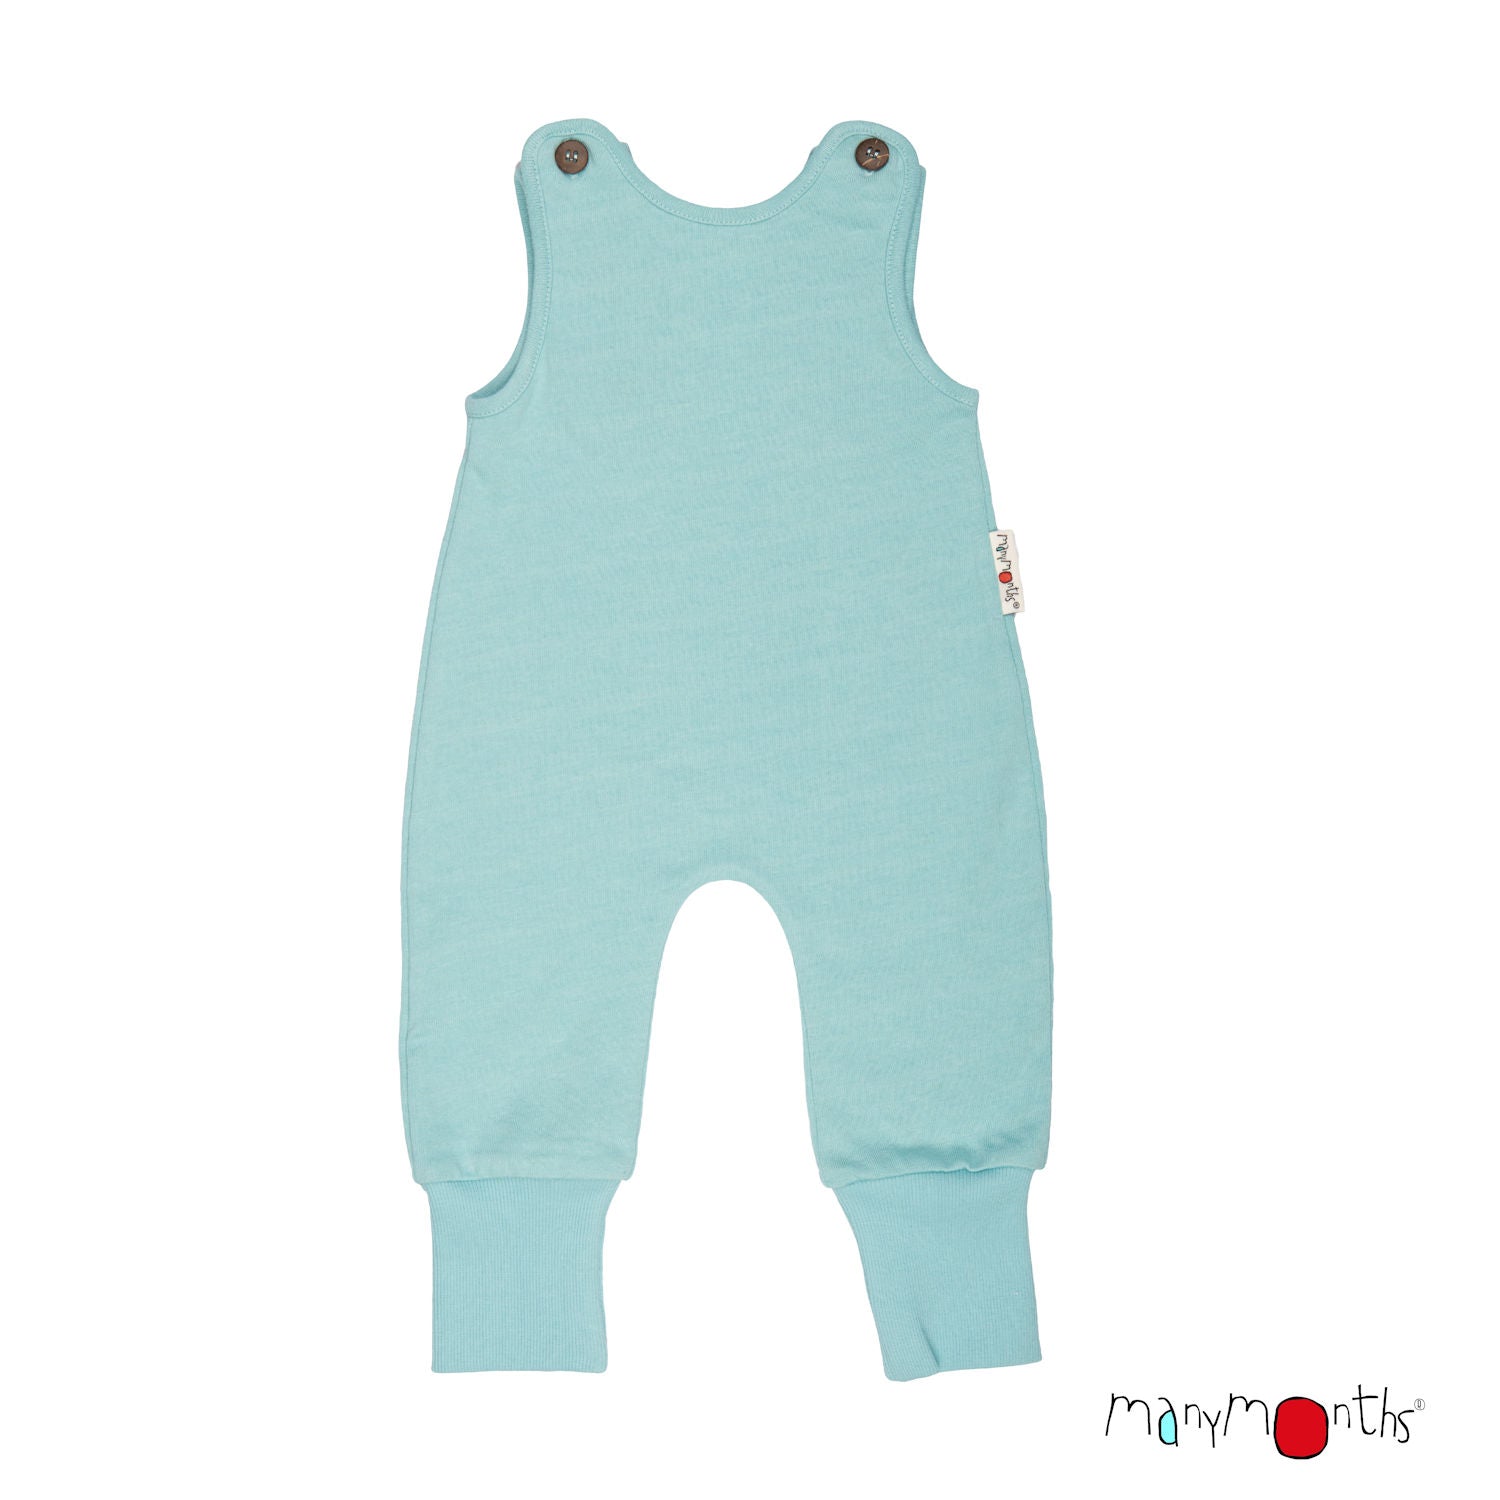 ManyMonths Romper Playsuit Hanf - Angel Turquoise - Familienbande